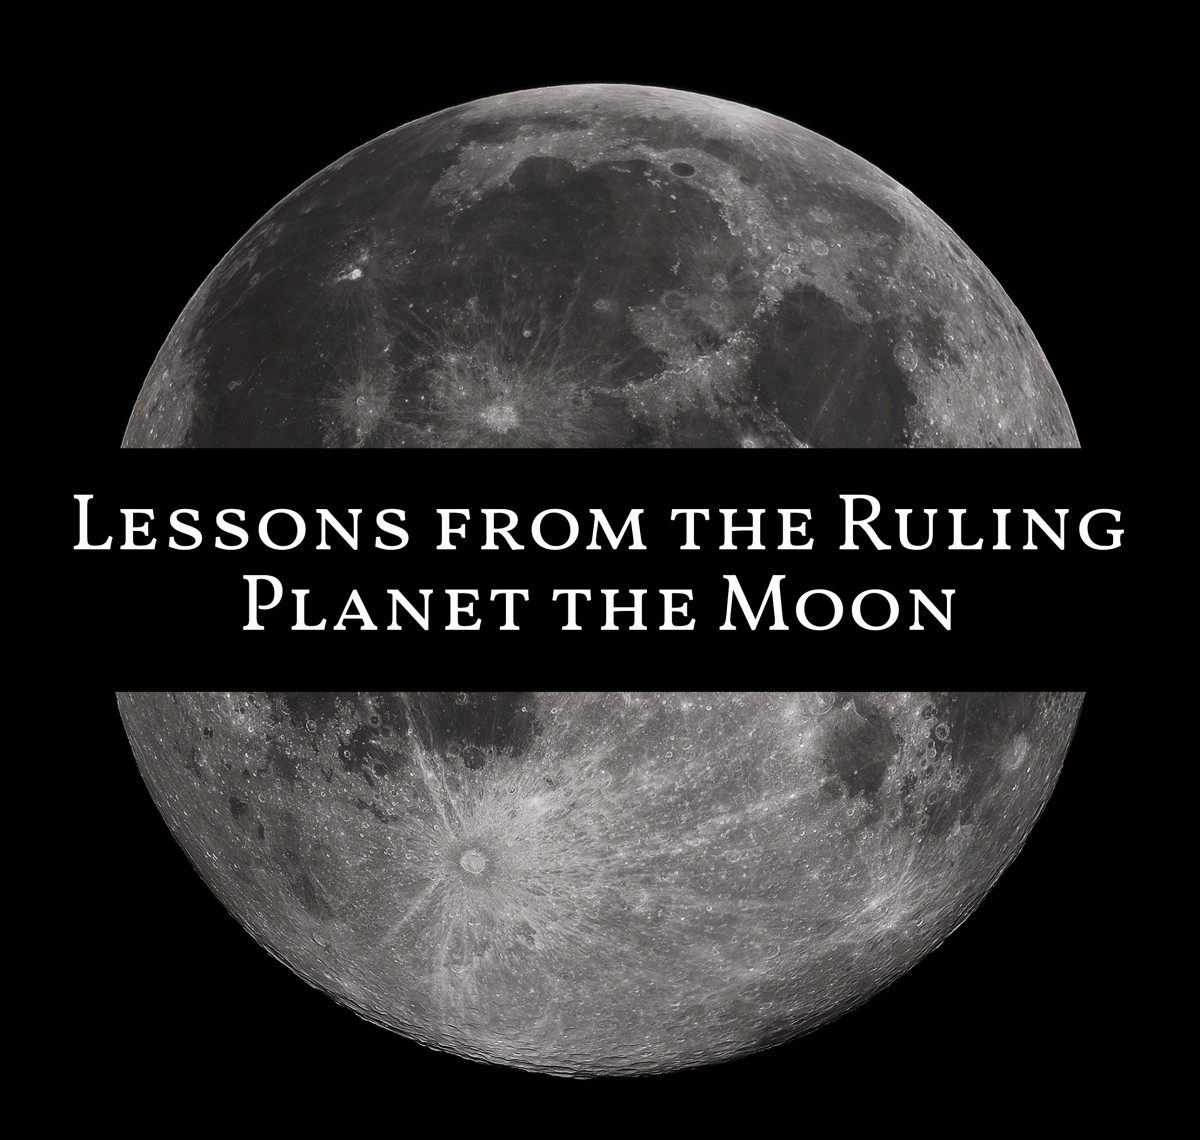 Everything You Need to Know about the Ruling Planet the Moon